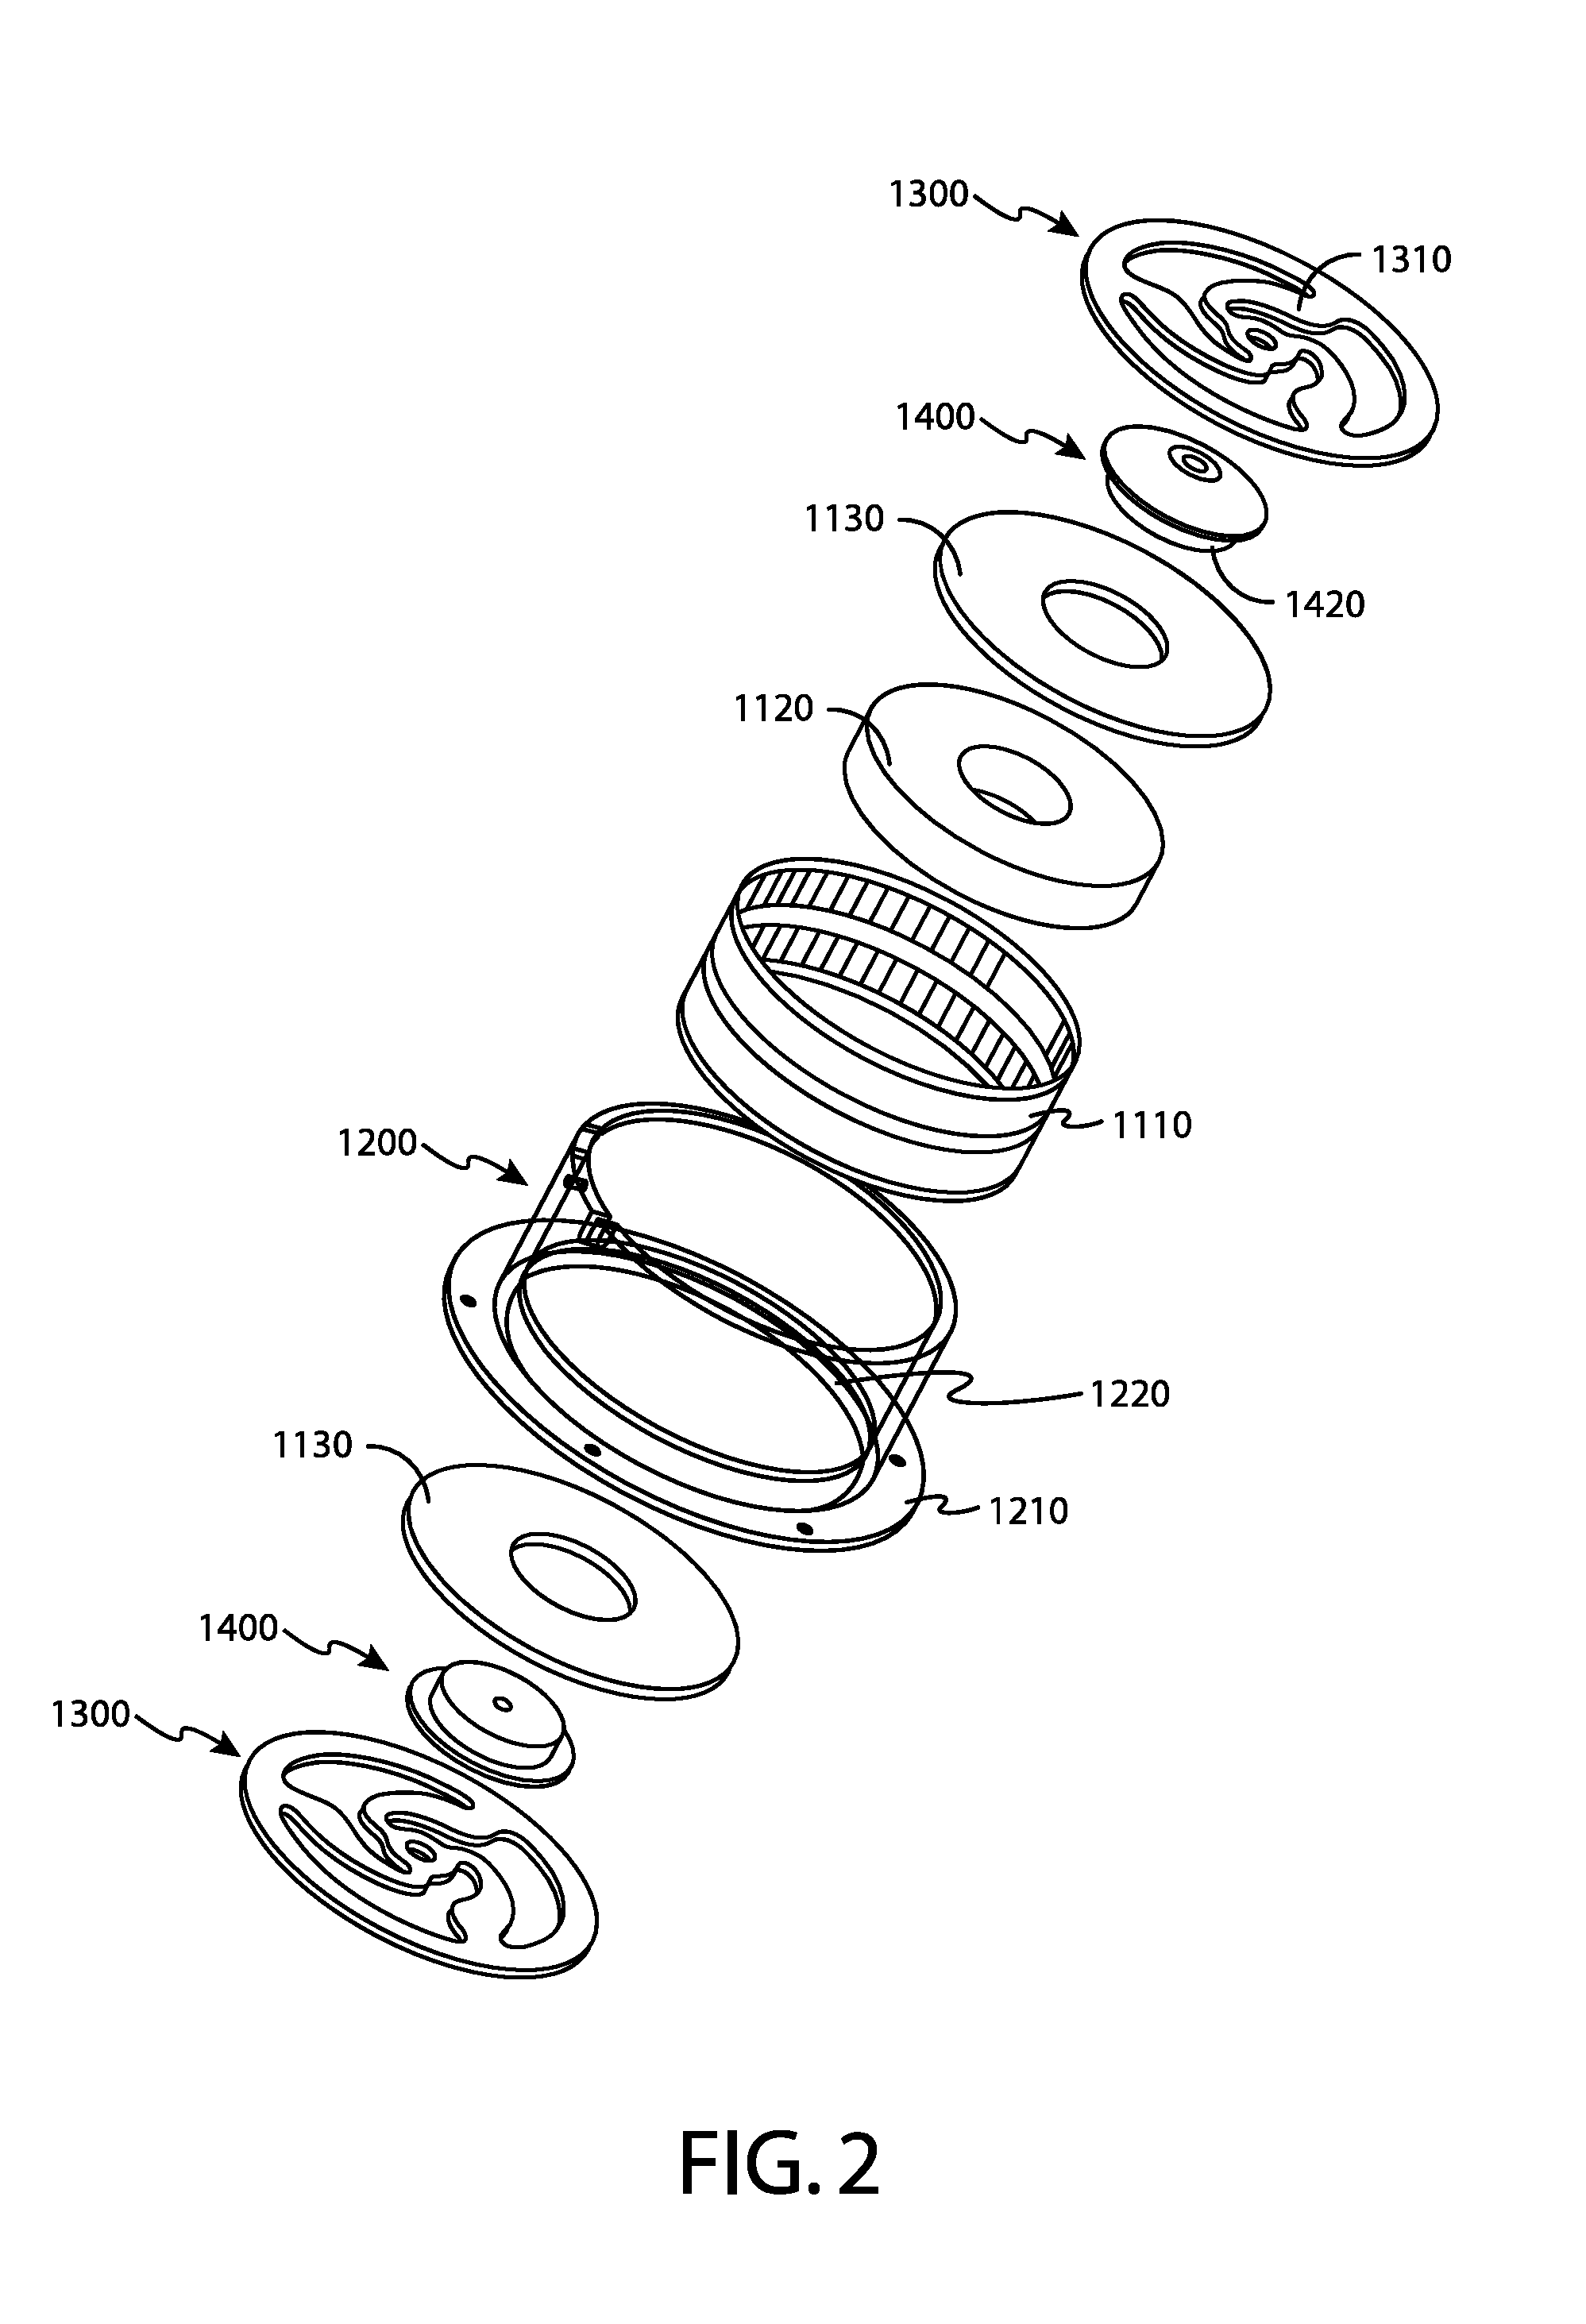 Shaker apparatus and related methods of transmitting vibrational energy to recipients